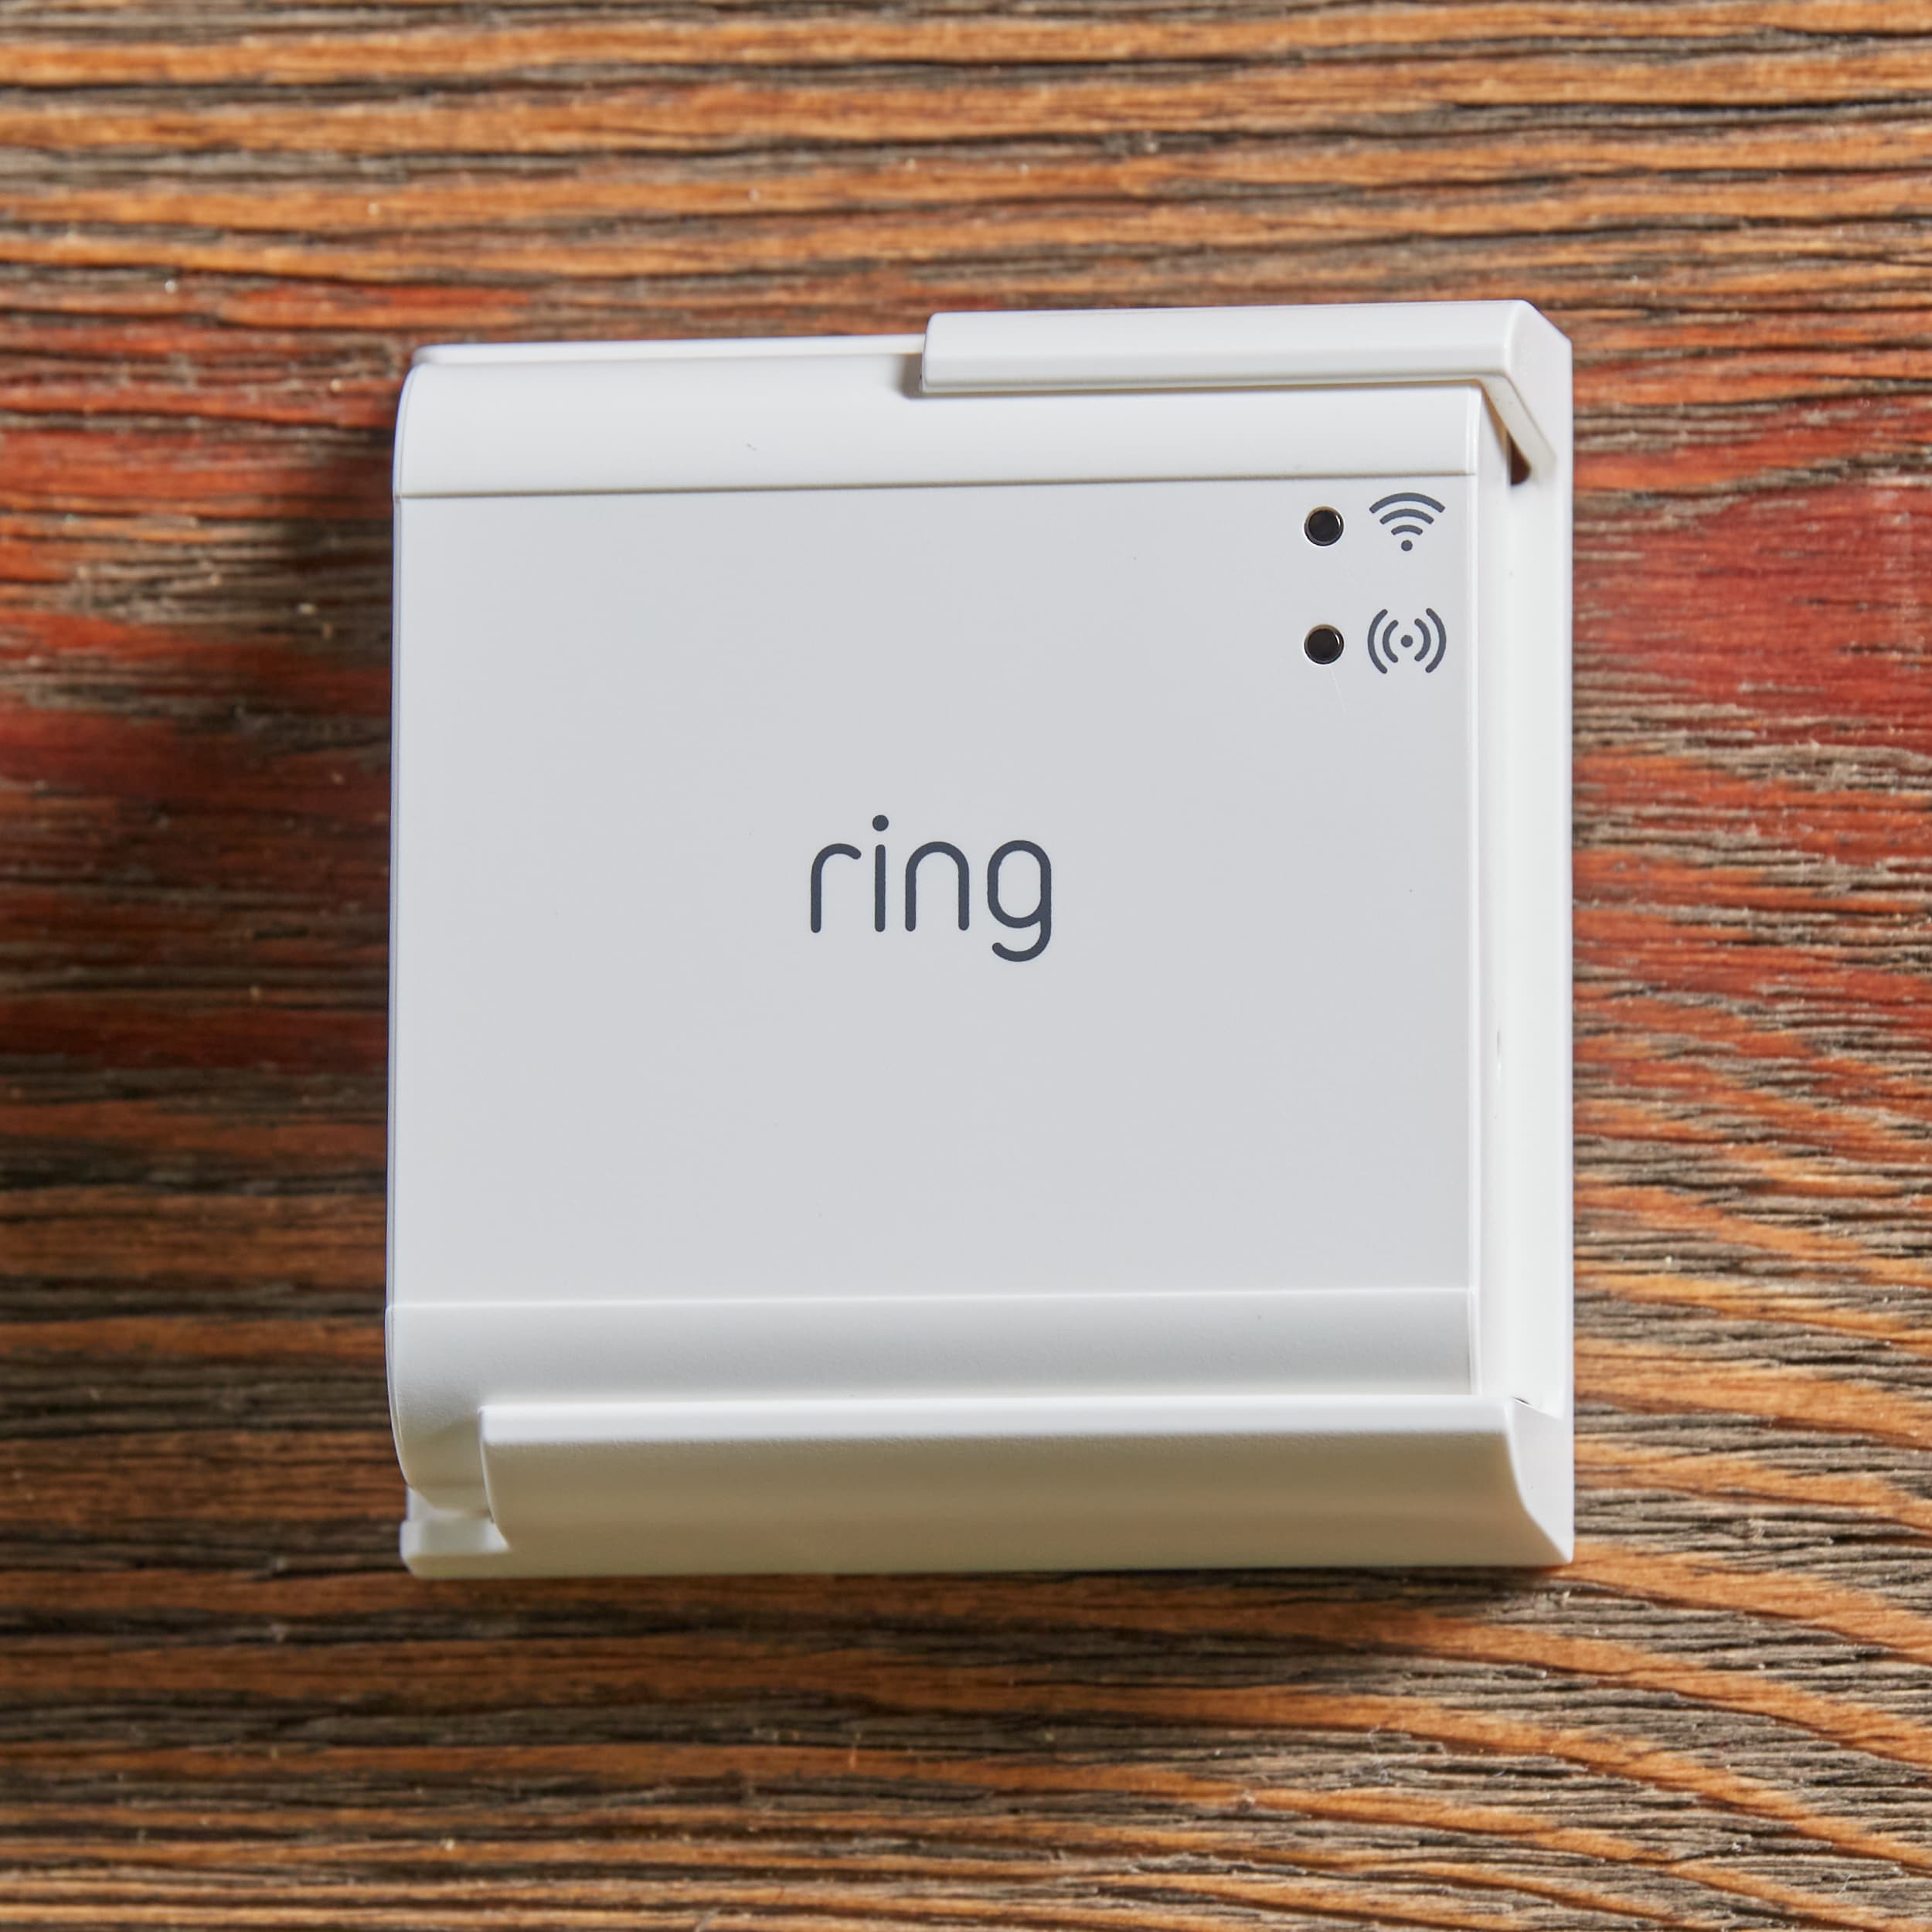 Ring bridge cannot be found or removedb - Smart Lighting - Ring